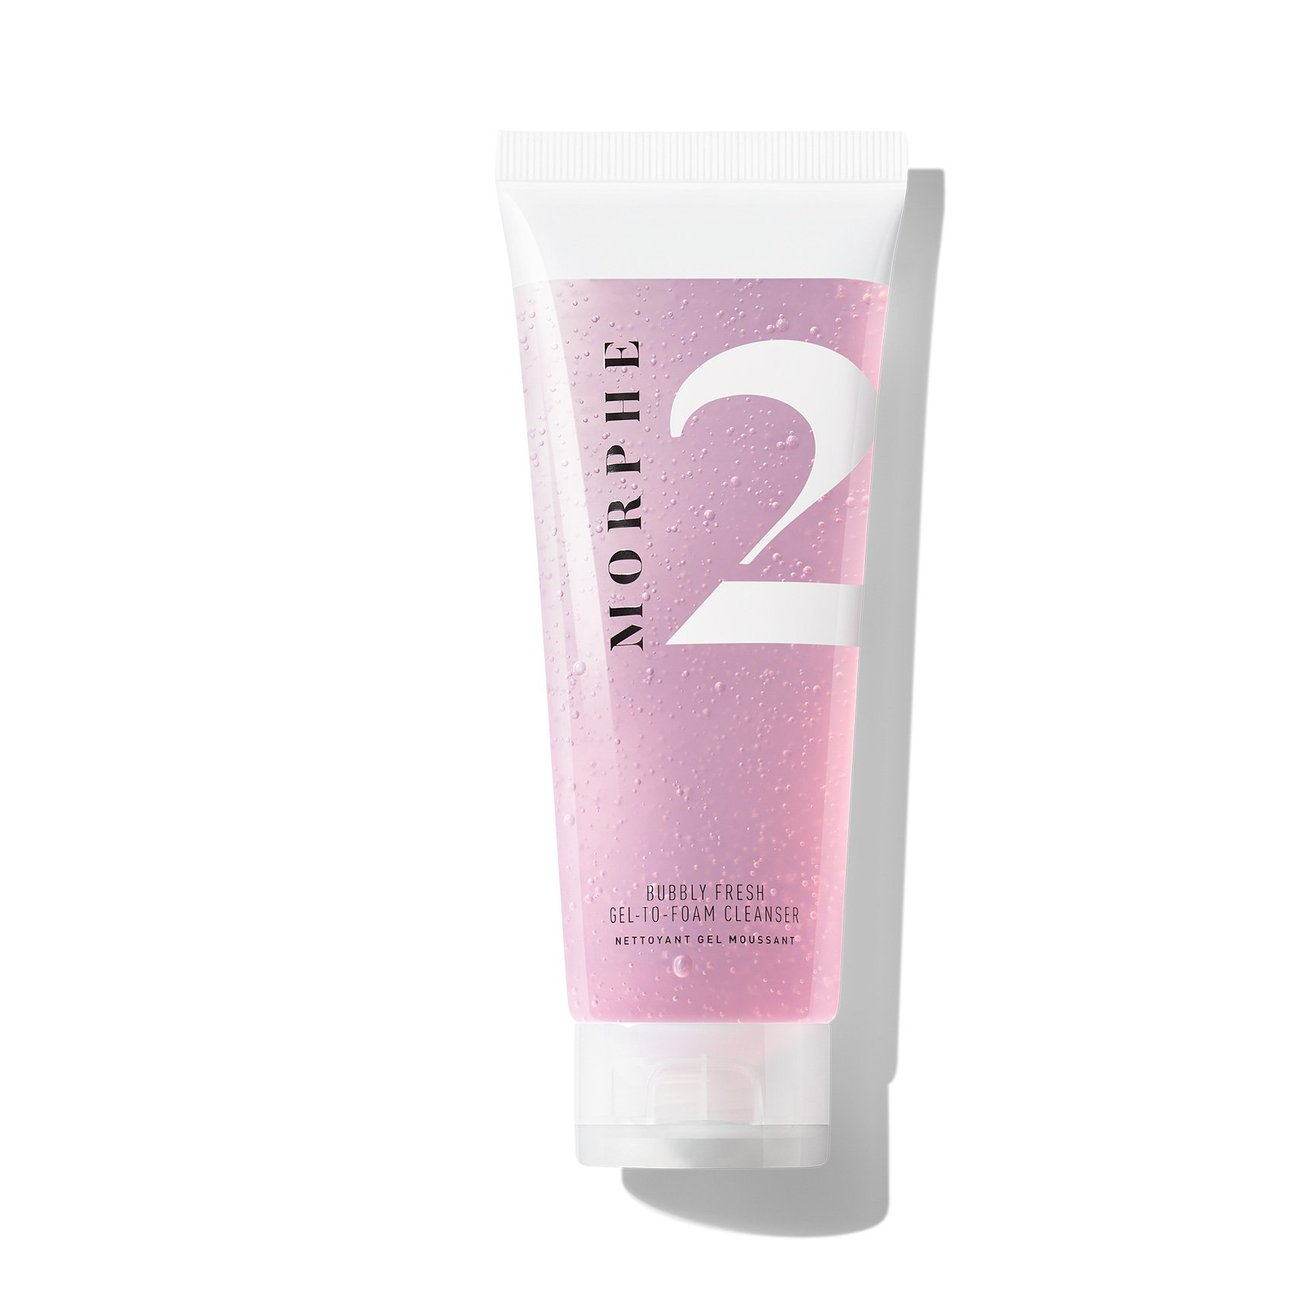 BUBBLY FRESH GEL-TO-FOAM CLEANSER NudeFace Chile